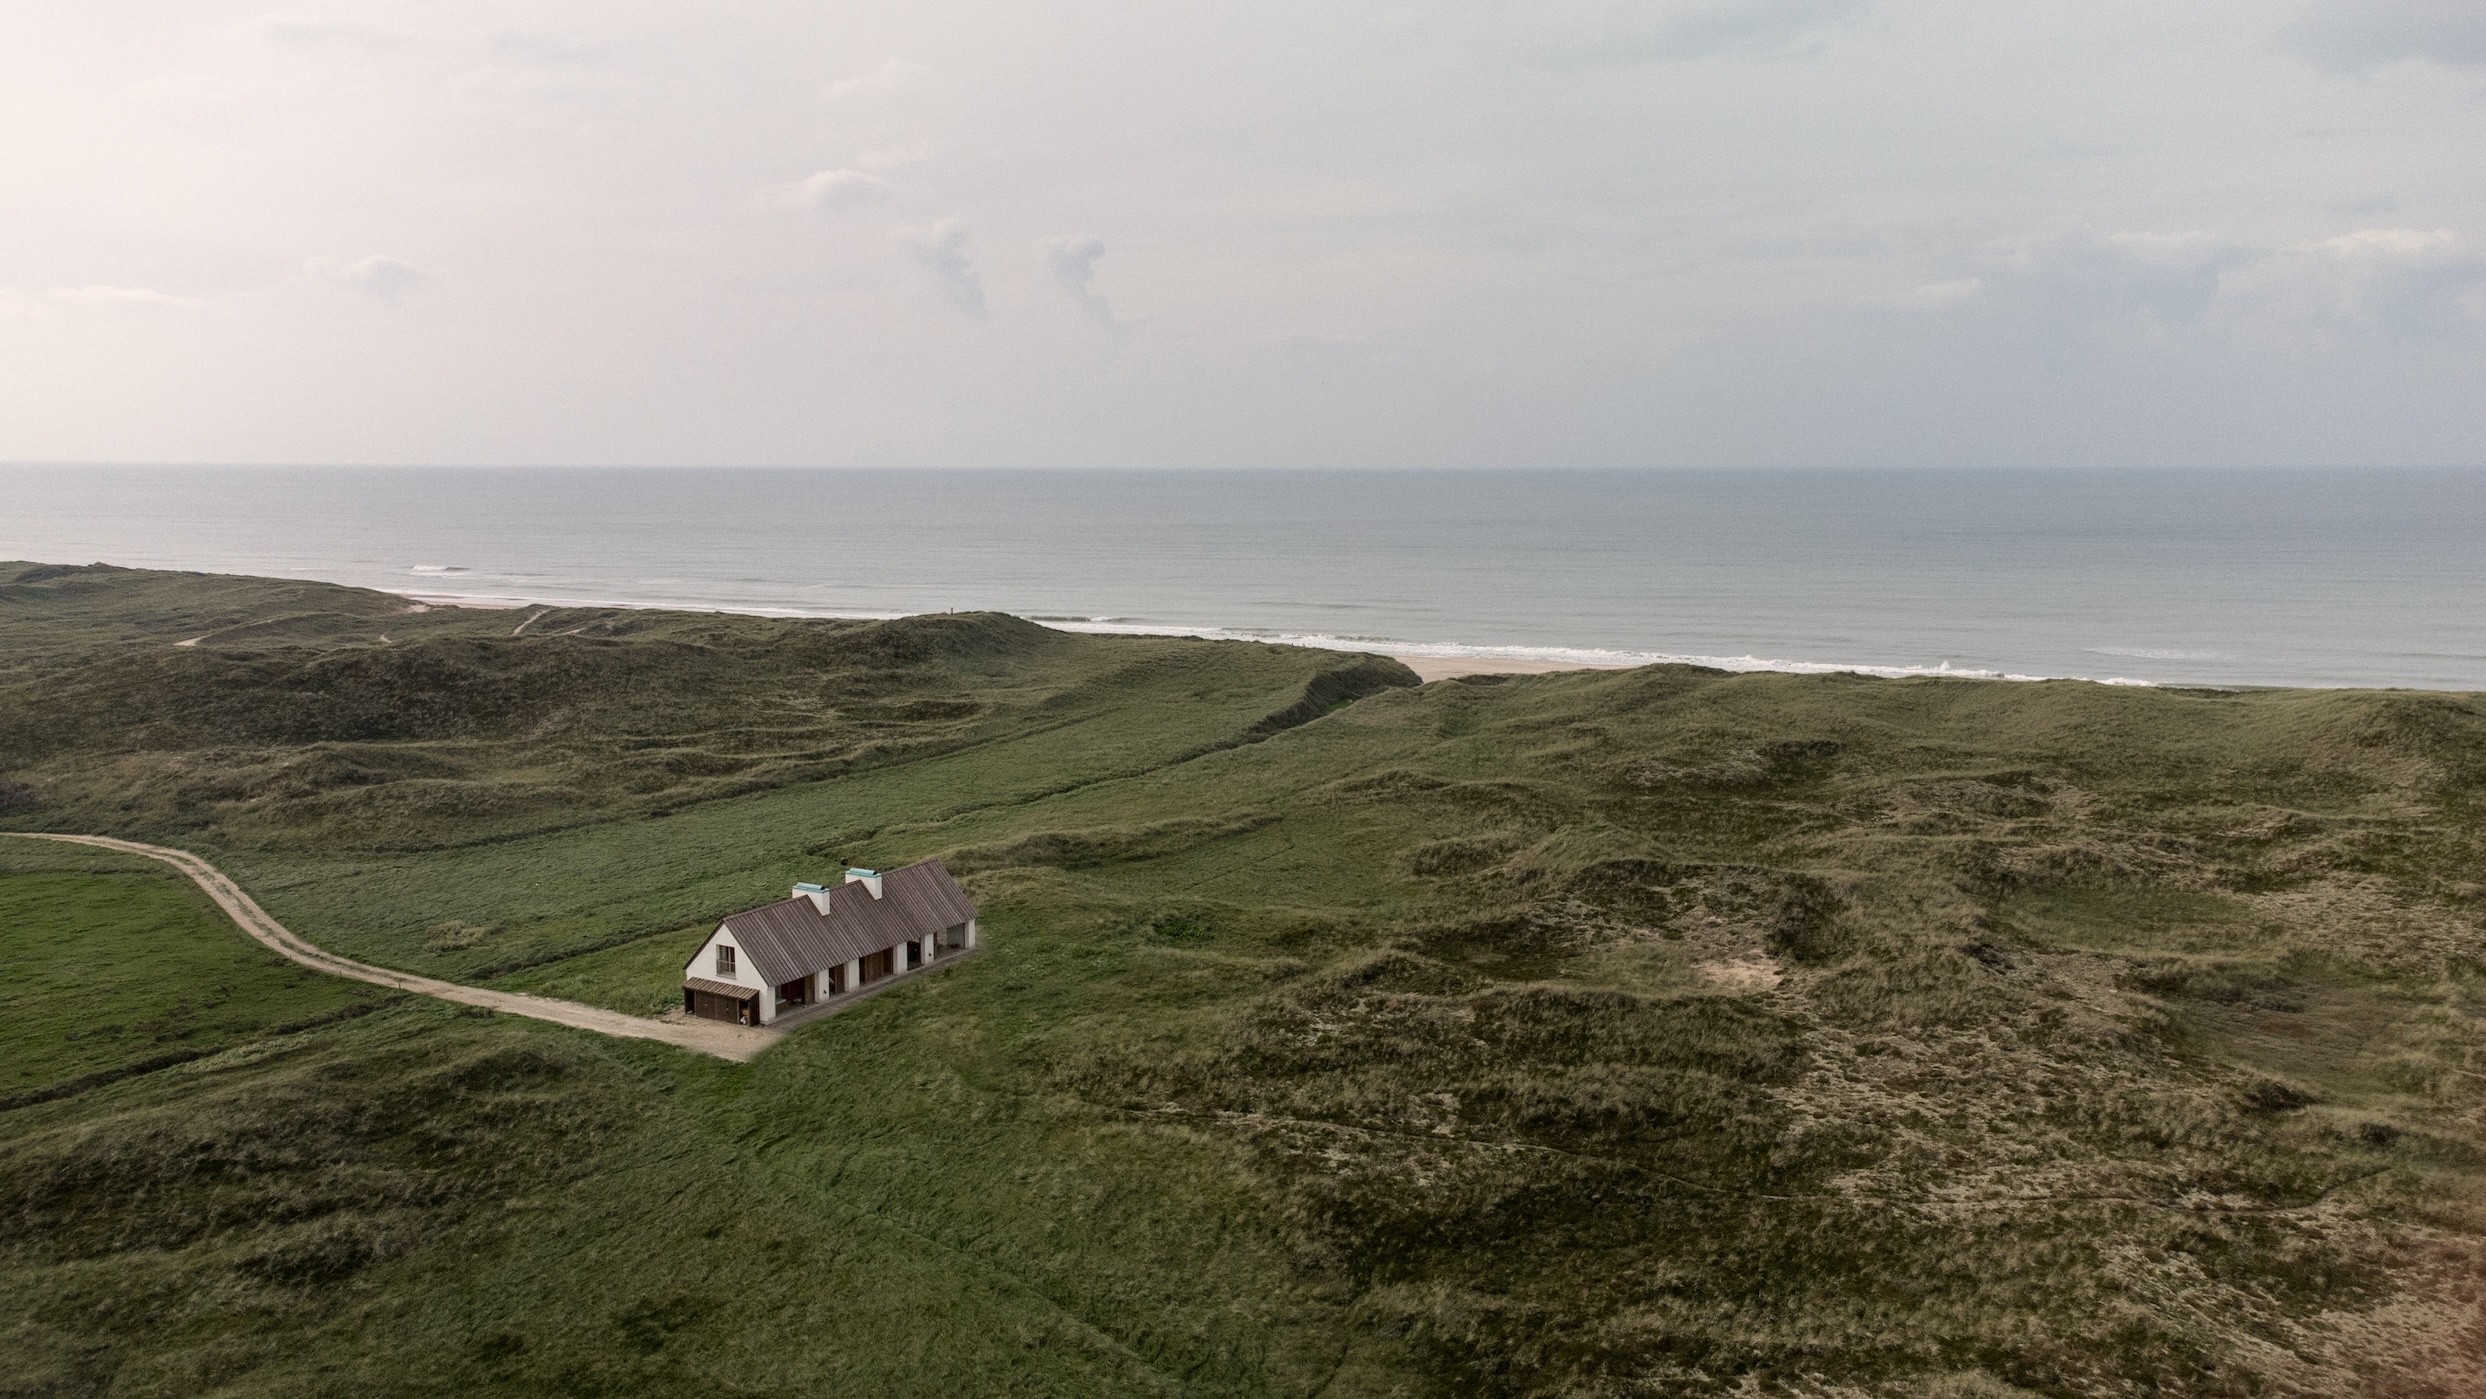 no neighbors in sight. the house is surrounded by untamed grassland and ocean i 17